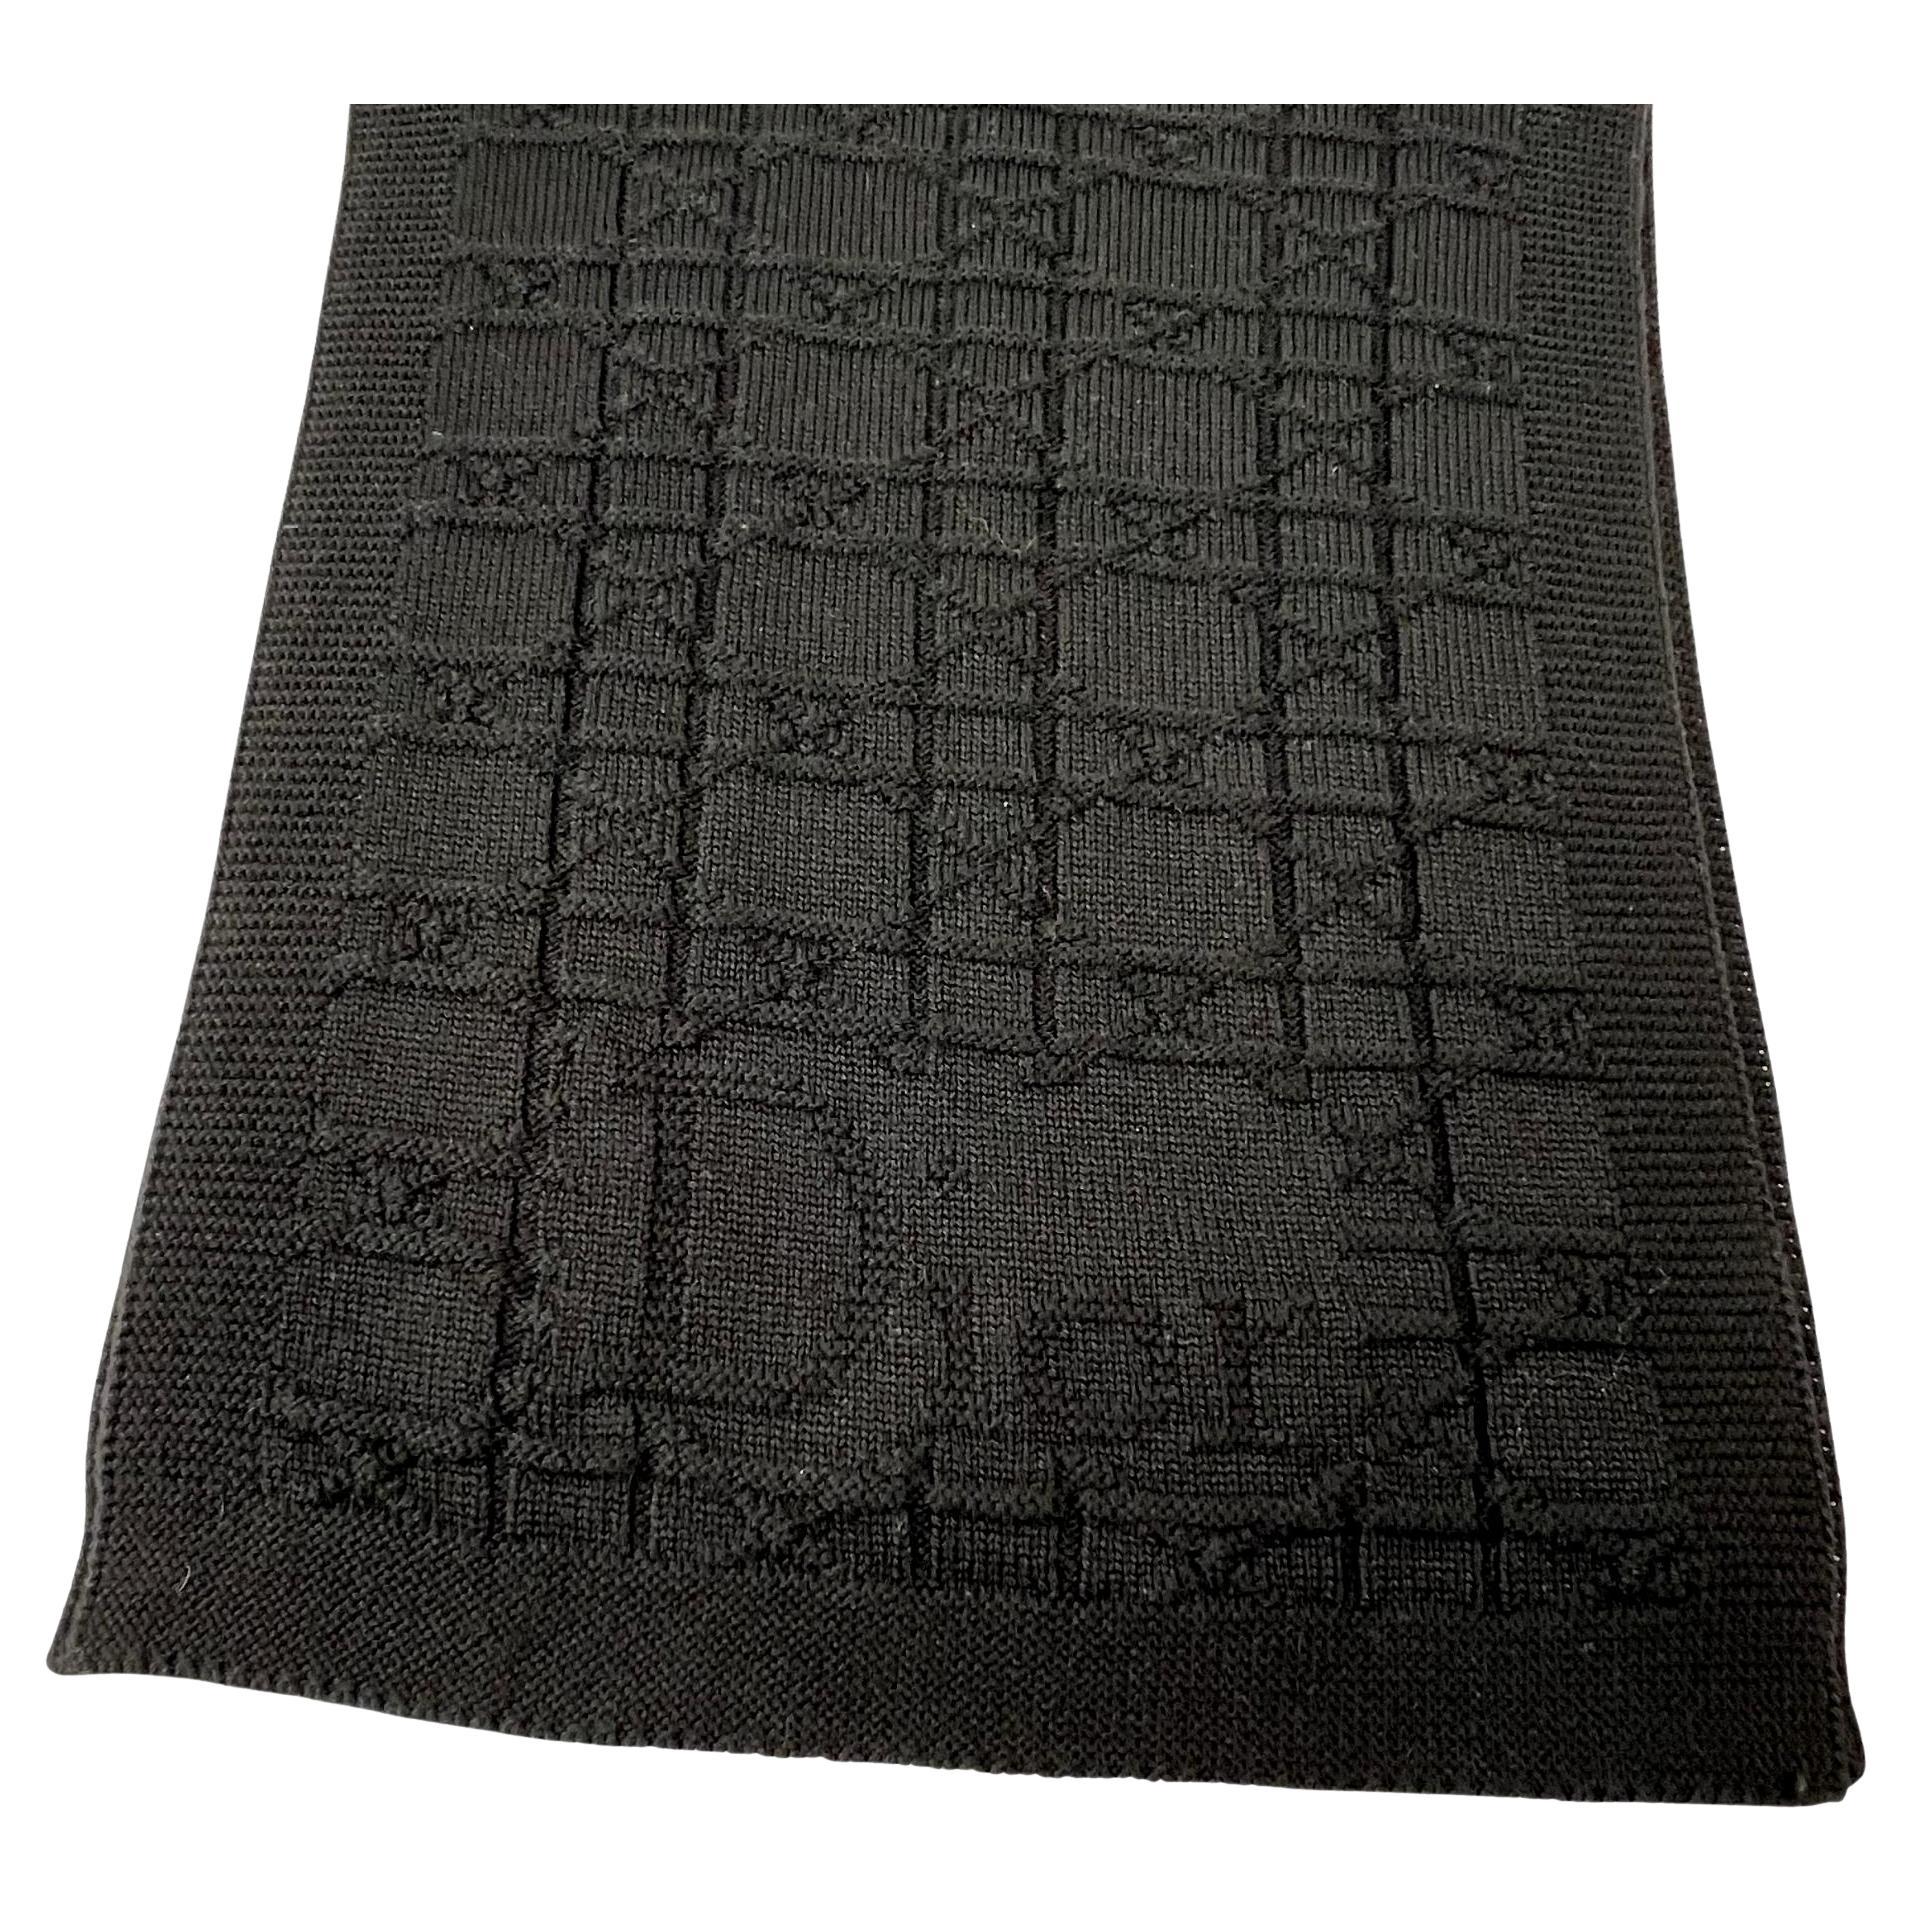 Dior Vintage Cannage Black Wool Scarf (Like New) For Sale